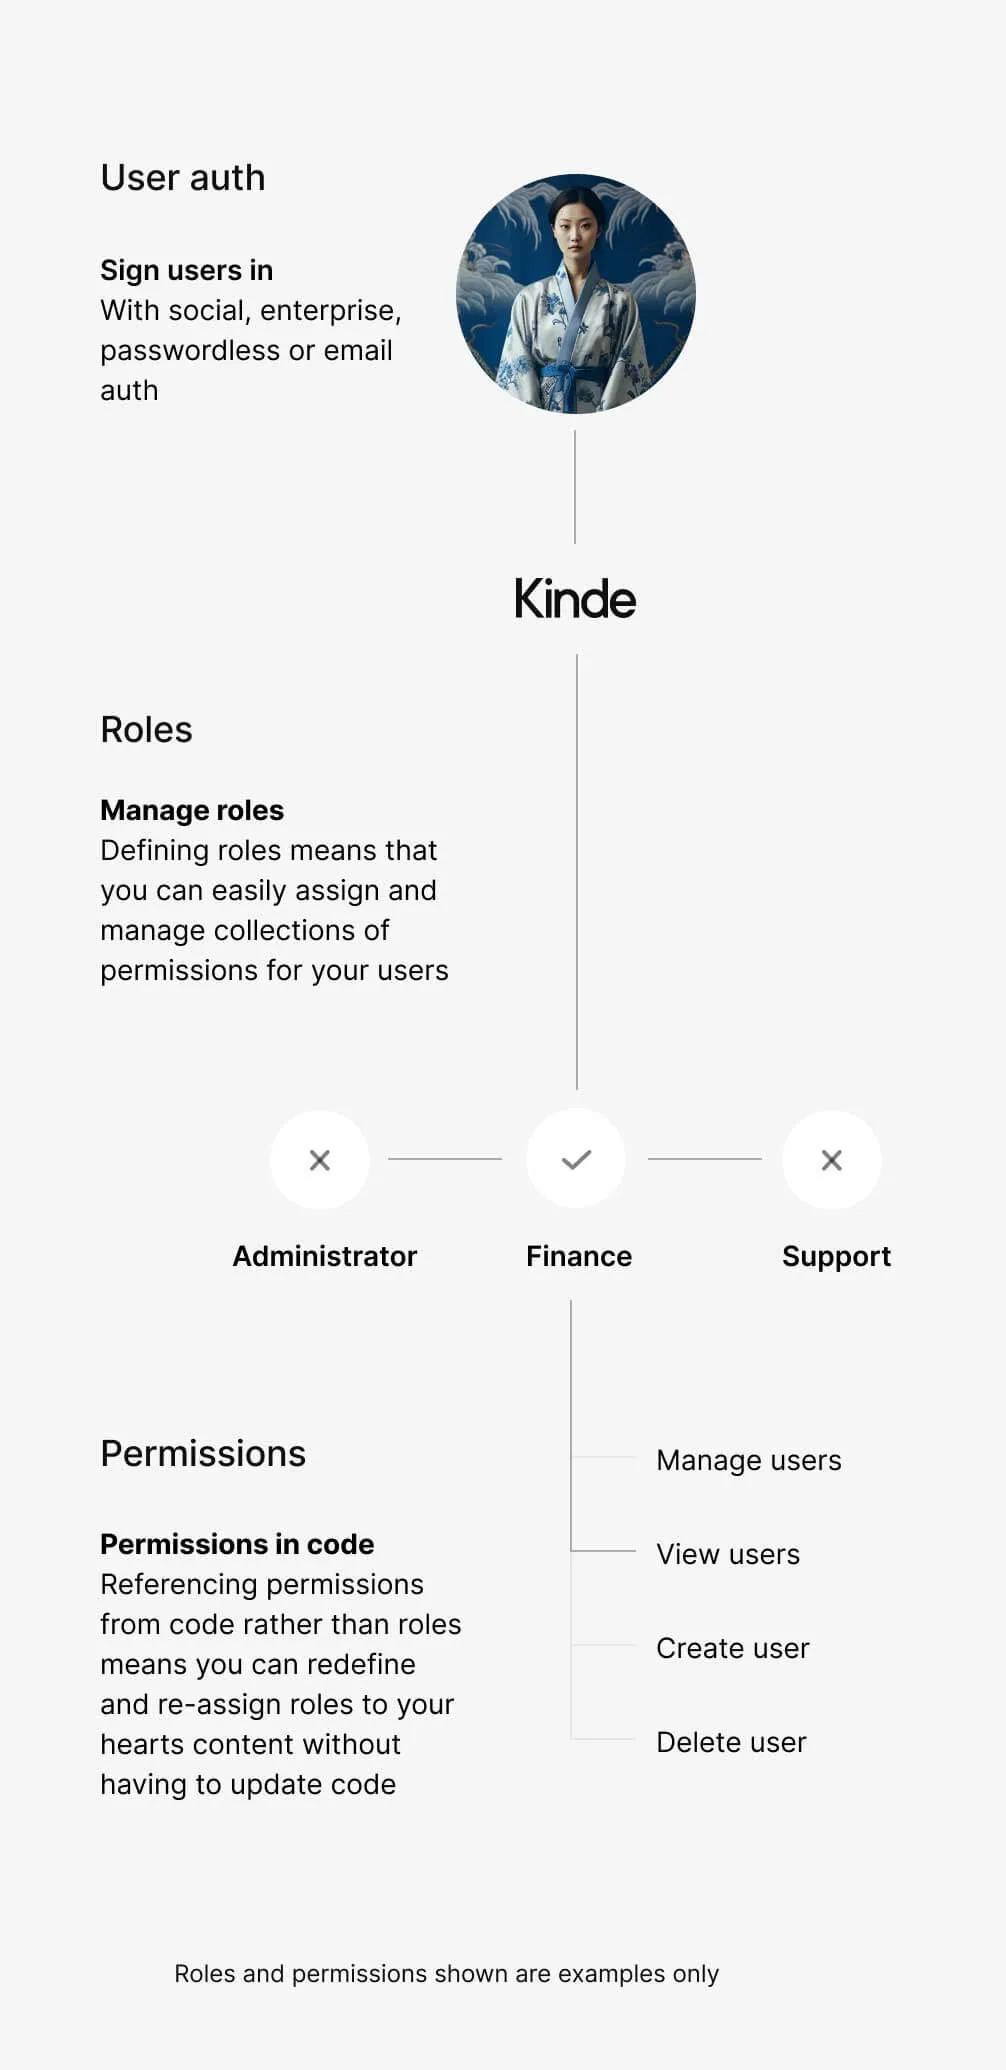 Illustration of a diagram containing a possible implementation of roles and permissions in Kinde